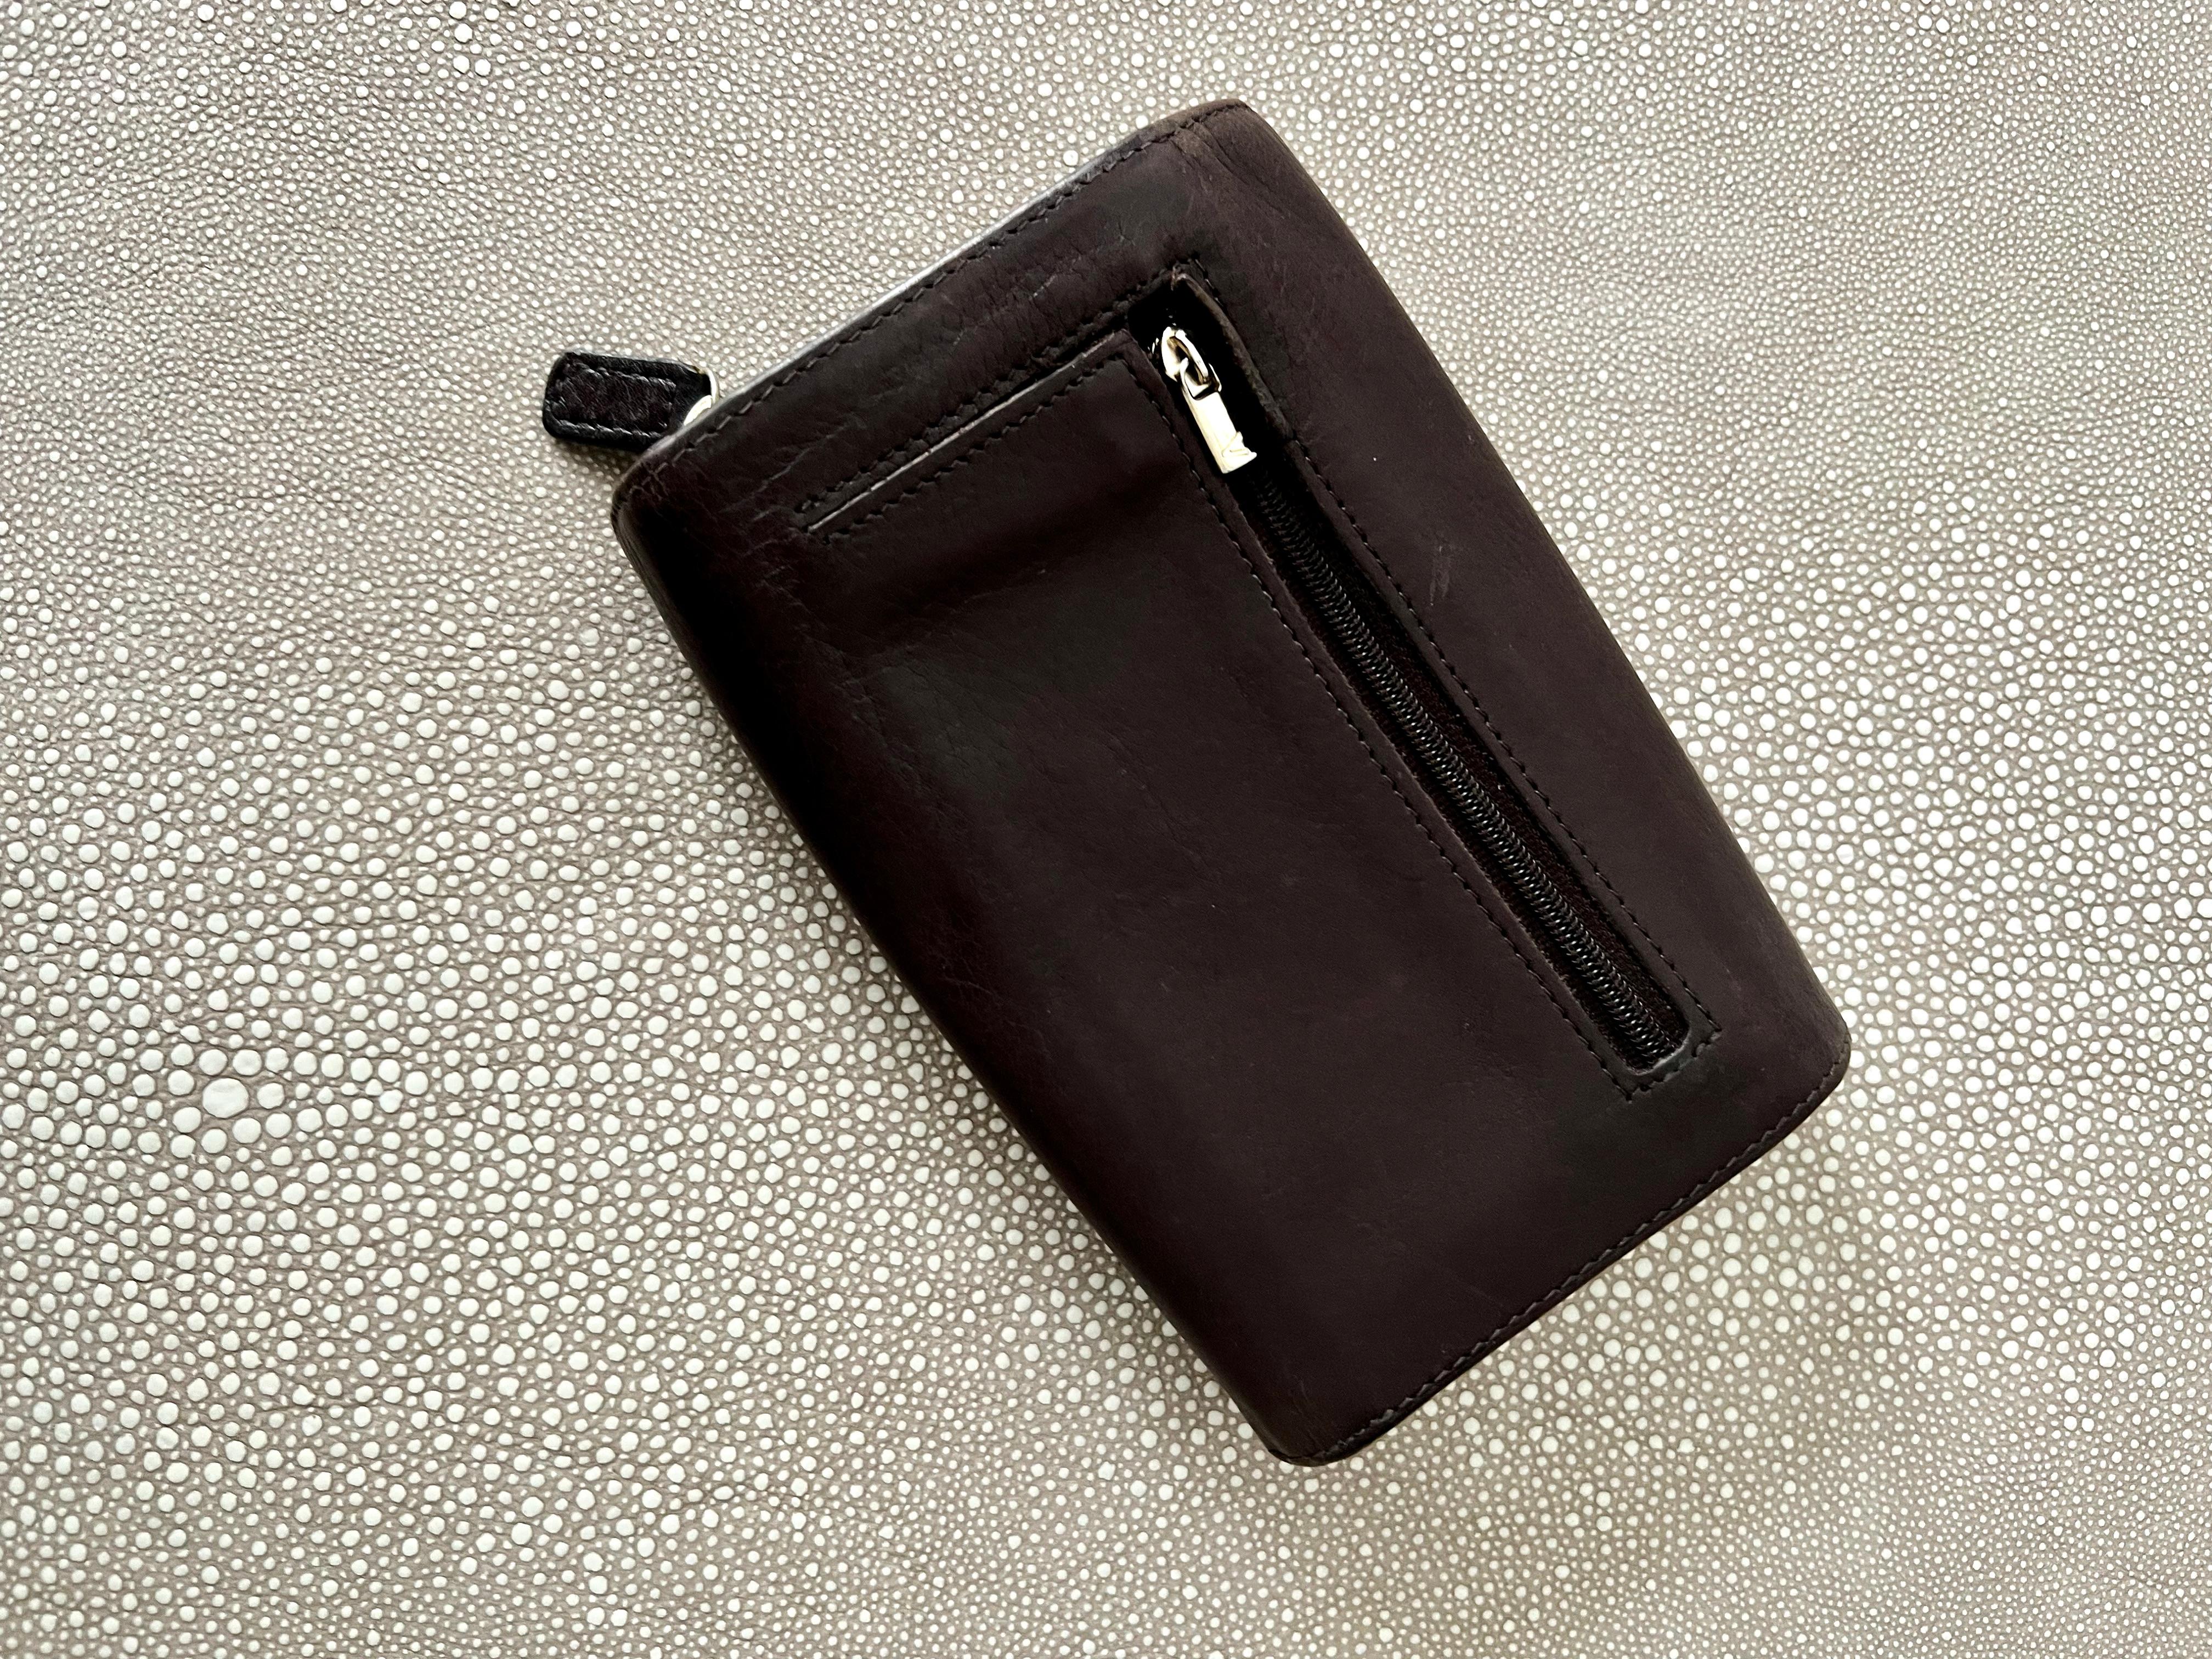 Valentino Italian Duo Fold Leather Wallet For Sale 2